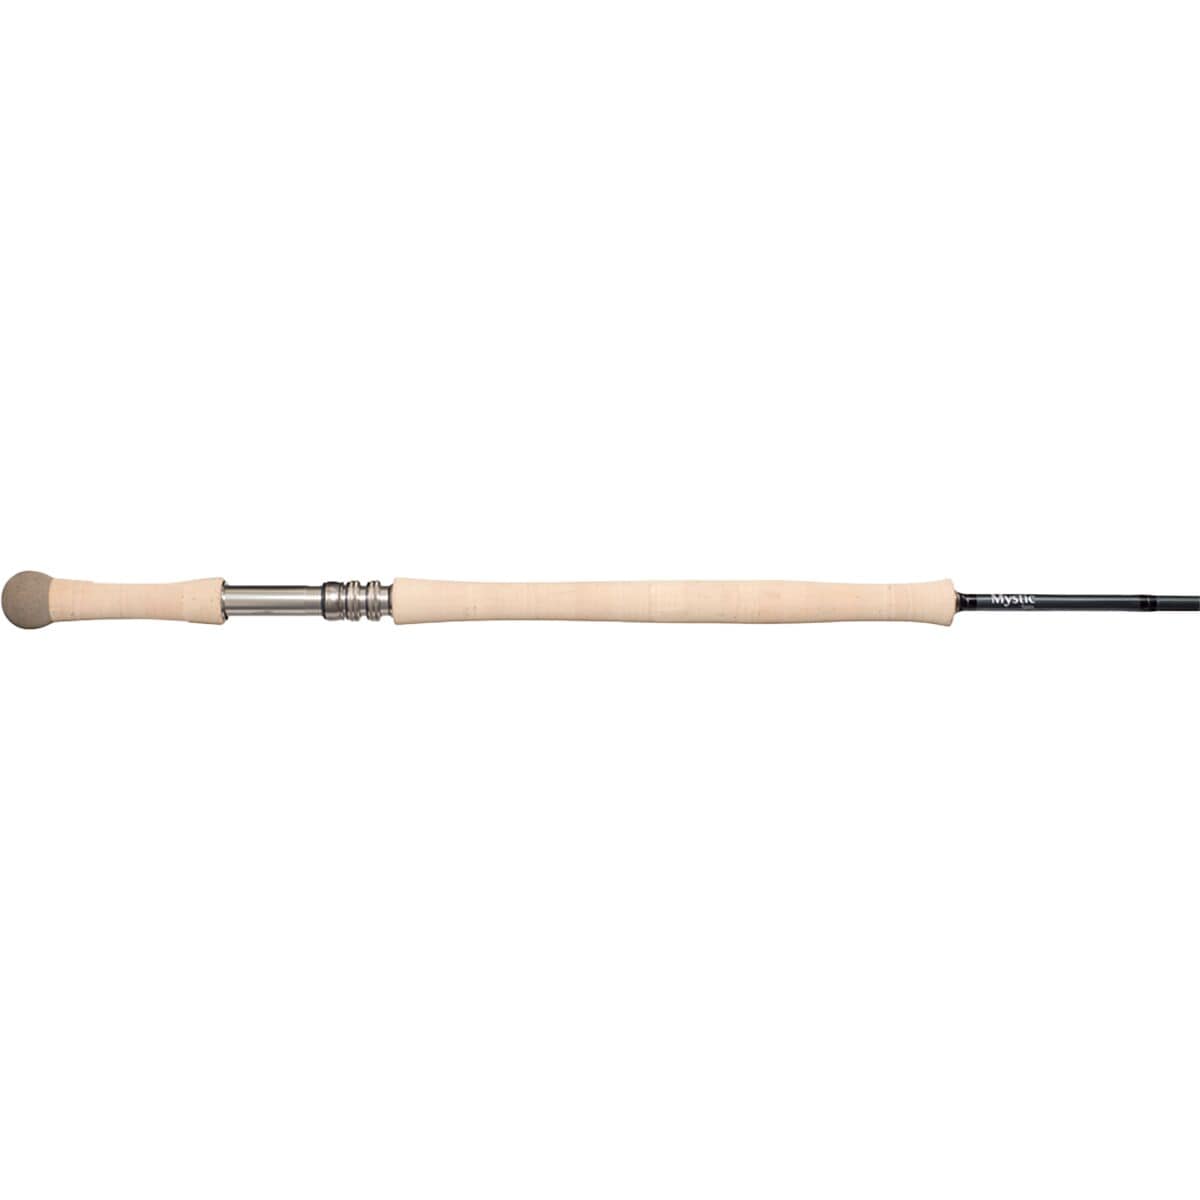 Mystic Rods M Spey Fly Rod - Fly Fishing